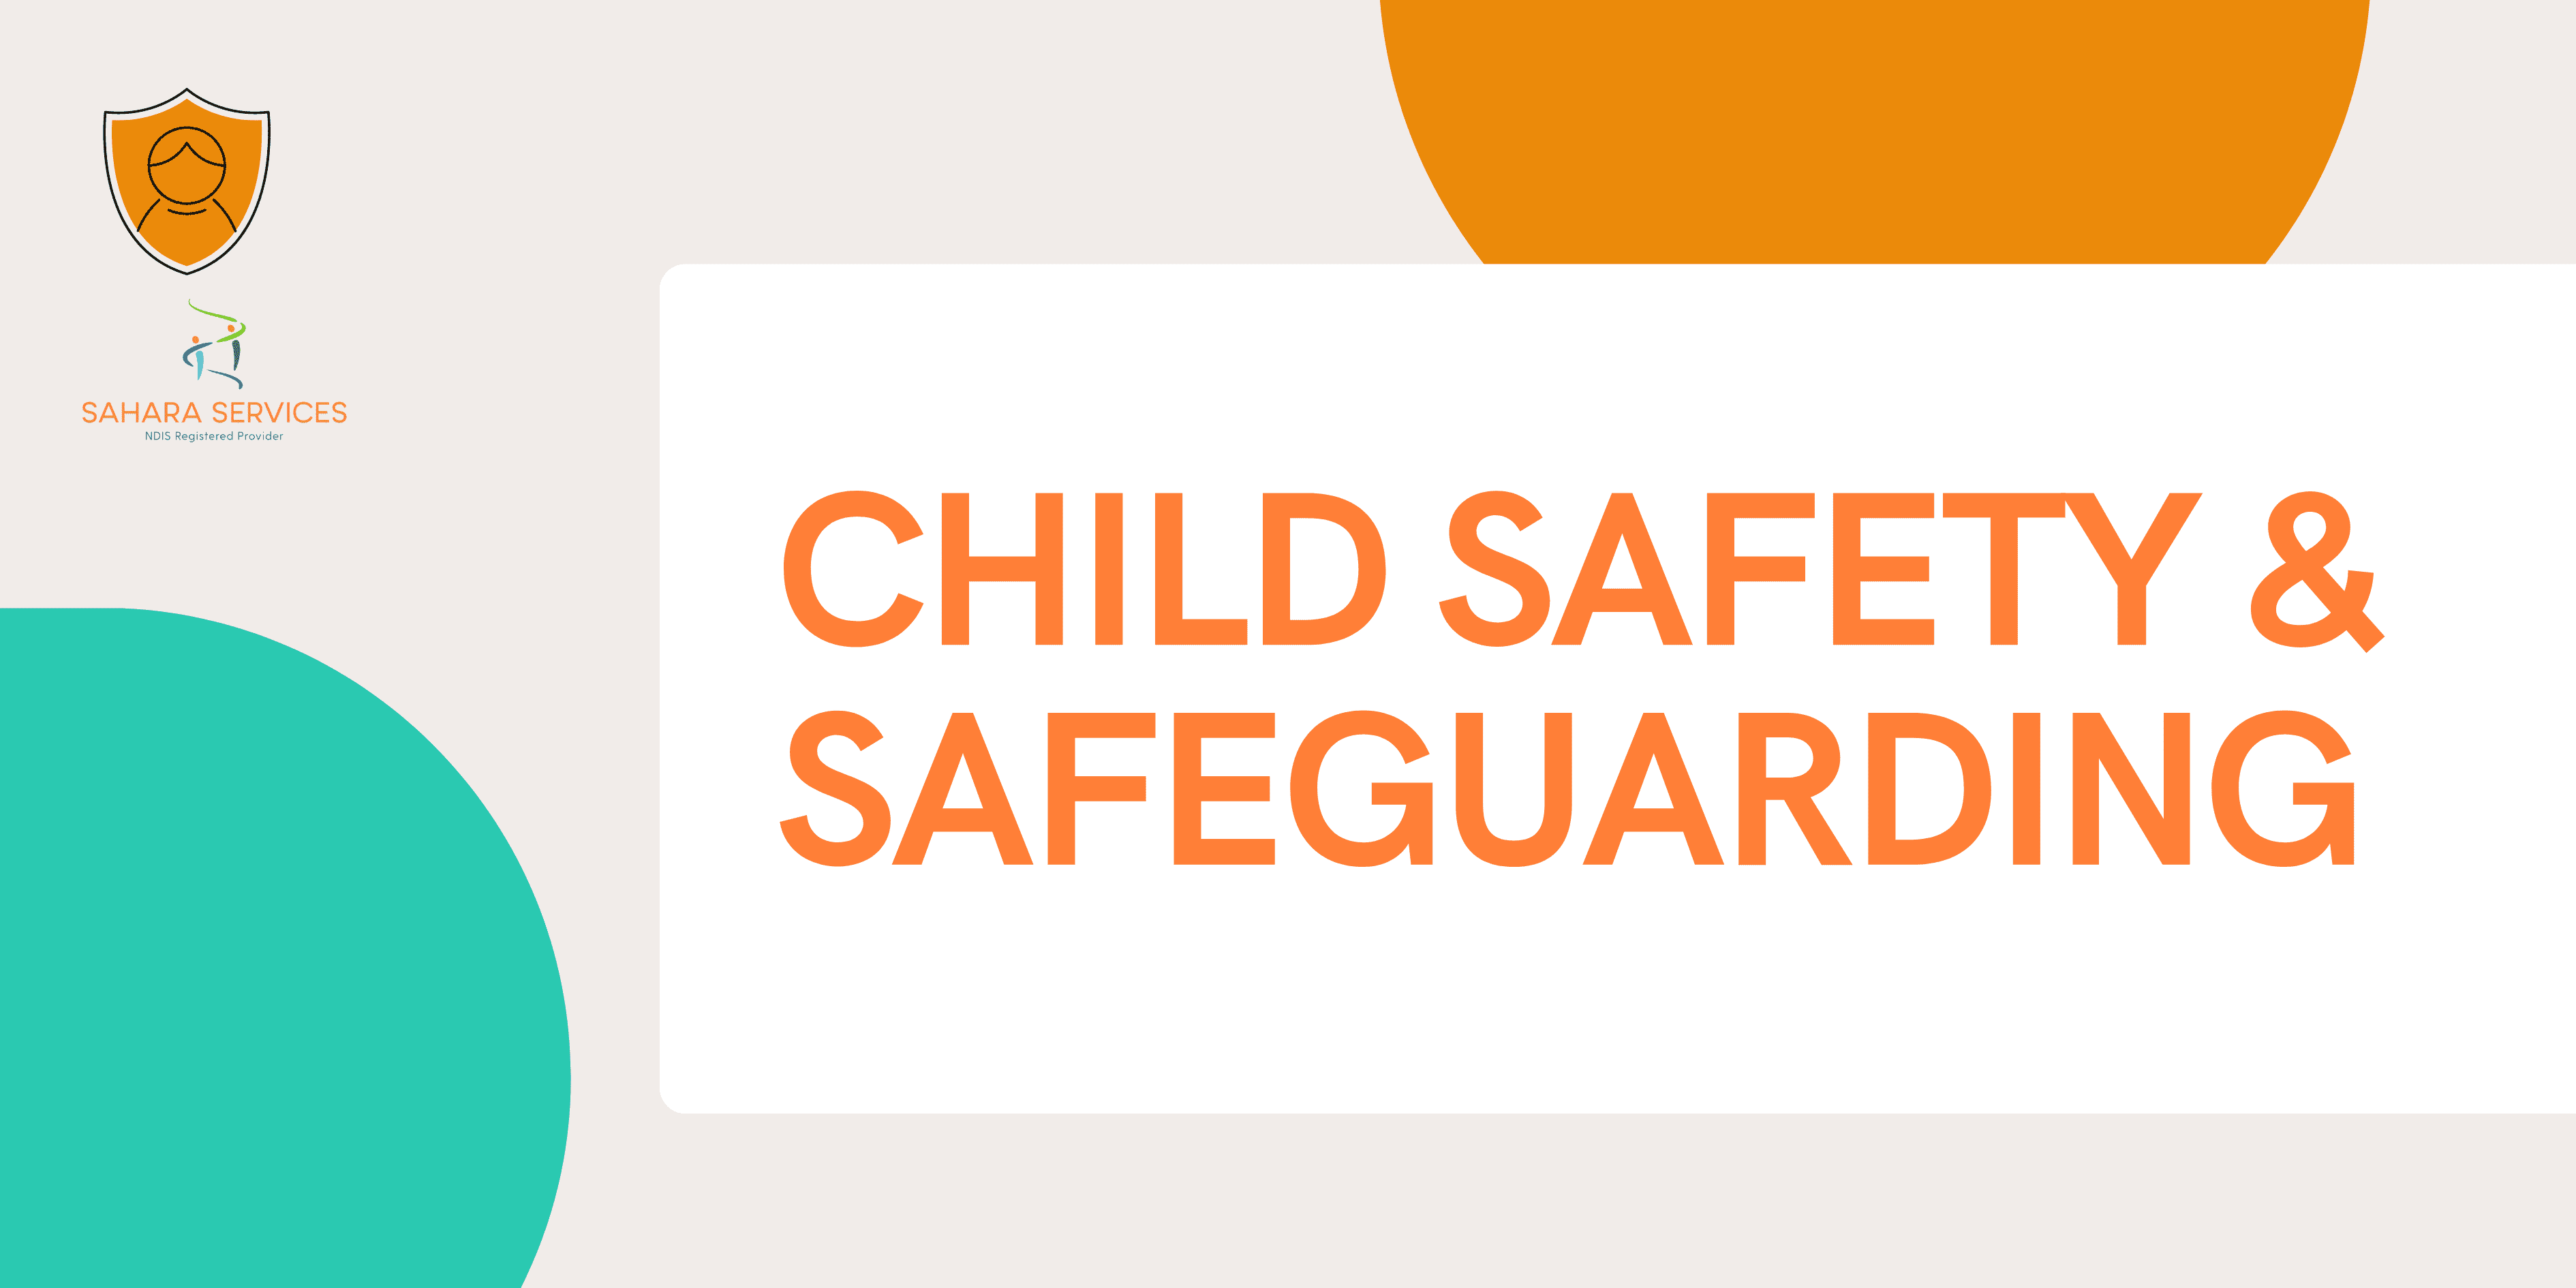 Child Safety First: Our Policies and Procedures